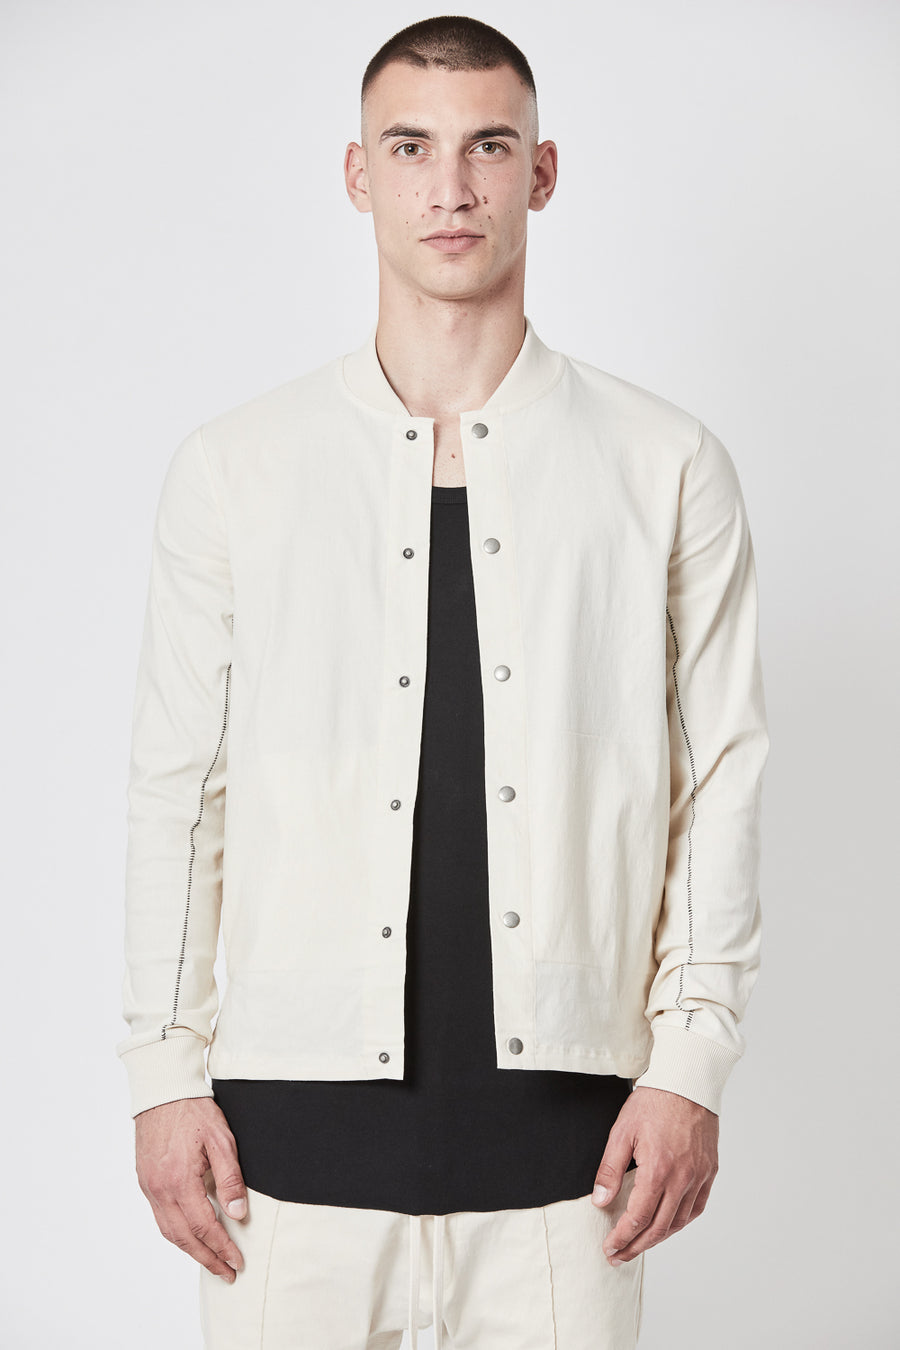 Buy the Thom Krom M SJ 583 Jacket in Ivory at Intro. Spend £50 for free UK delivery. Official stockists. We ship worldwide.